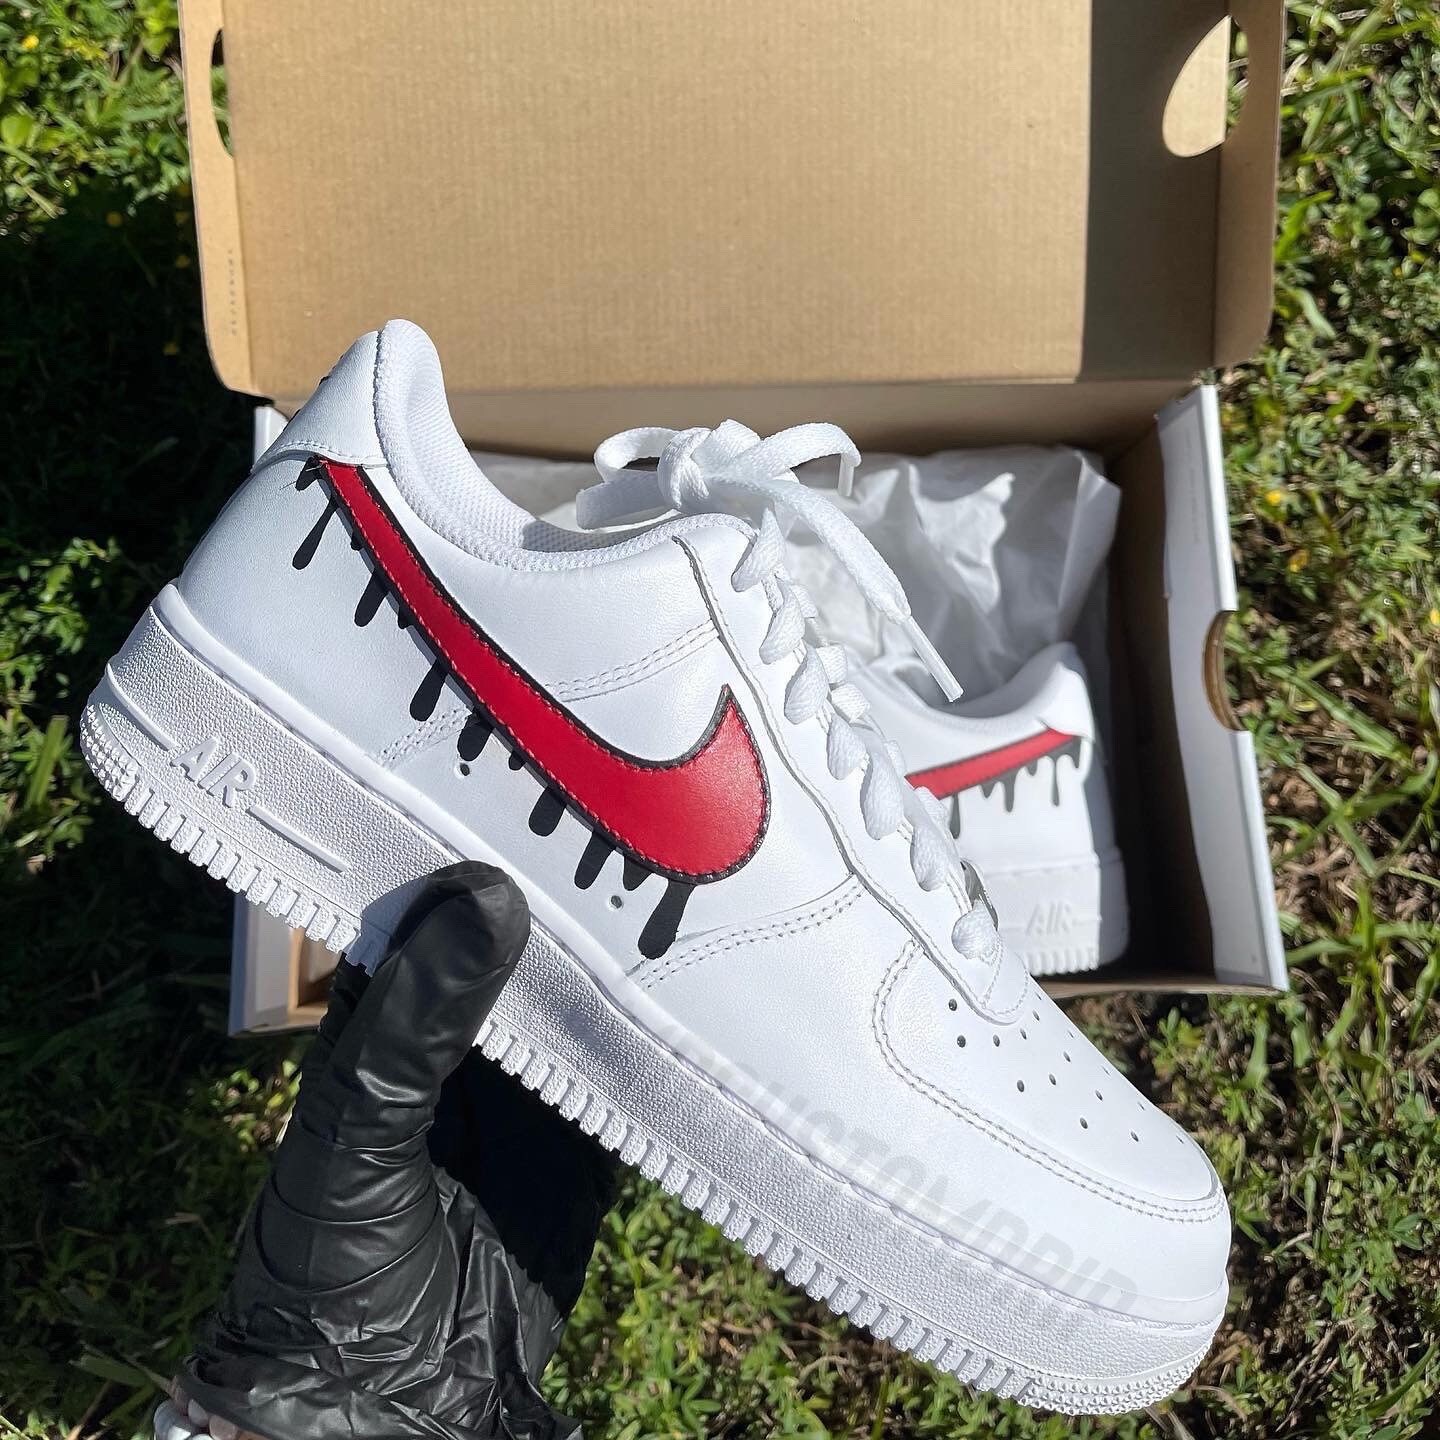 Blood Air Force 1 - Etsy